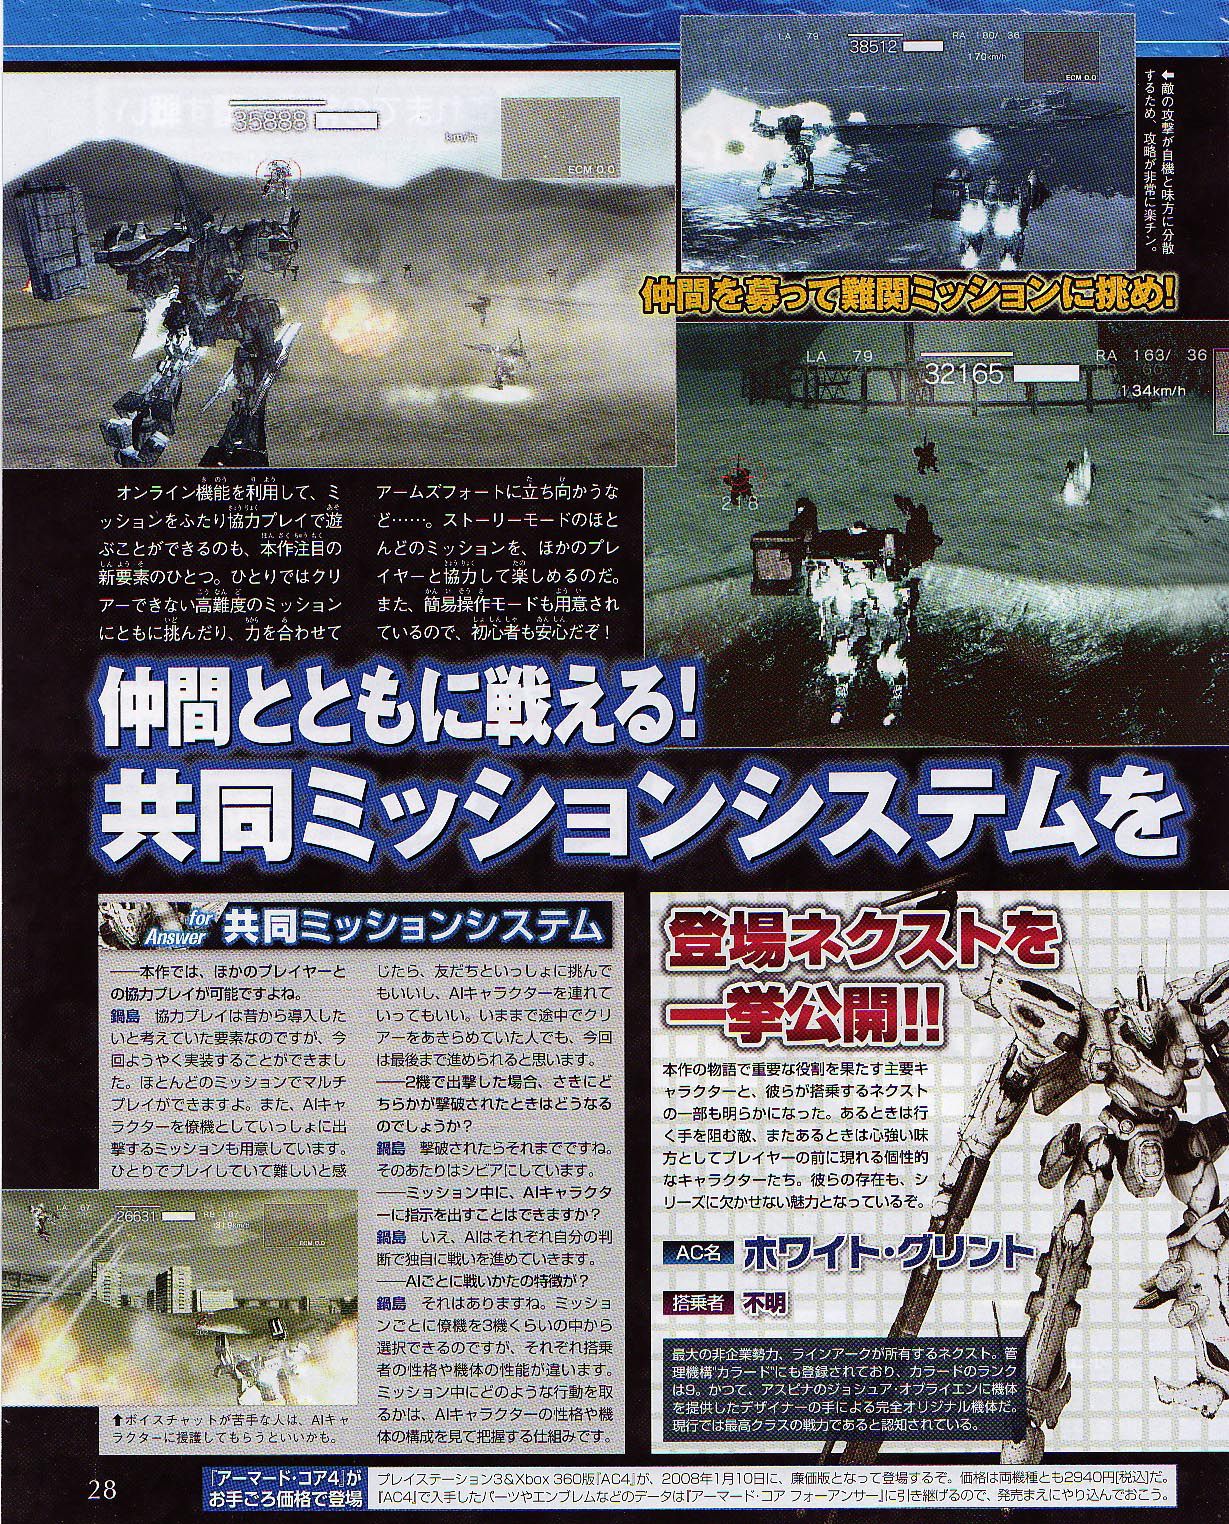 Armored core 4 answer ps3 xbox 360 3